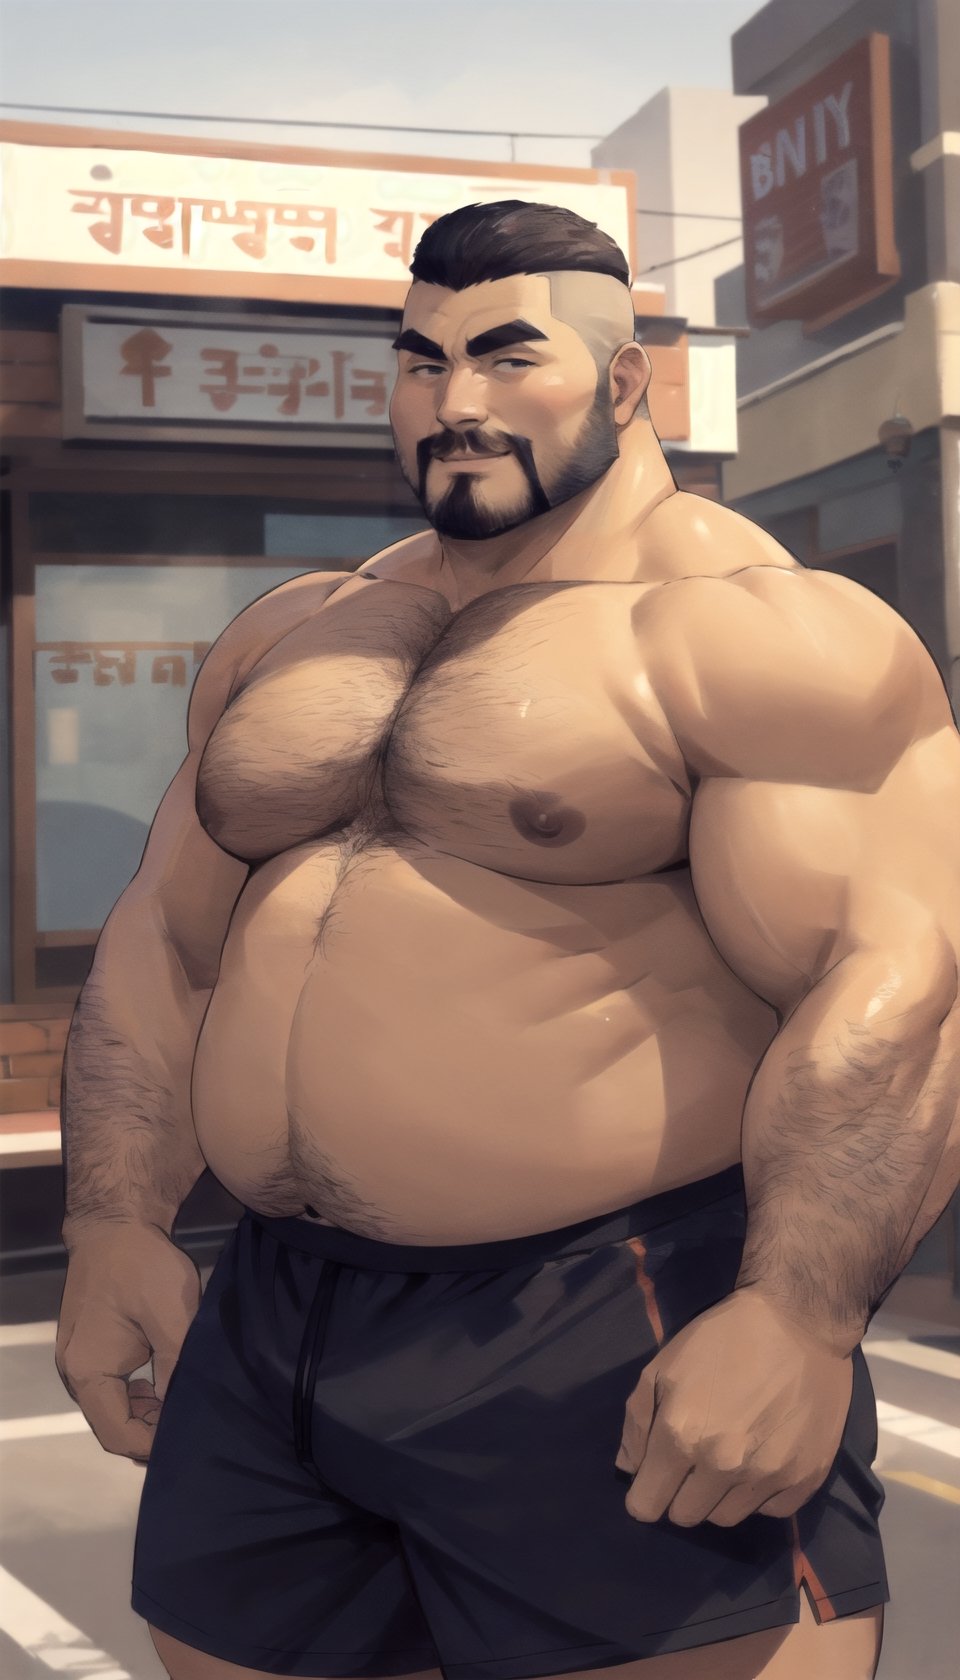 men , big , giant,Thai style( beefy daddy style)(chubby mature man),(chubby man)(Bold),( tough), (muscular man), 1mature, male focus, in a Men's barber shop, brick building, outside, logo, morning day